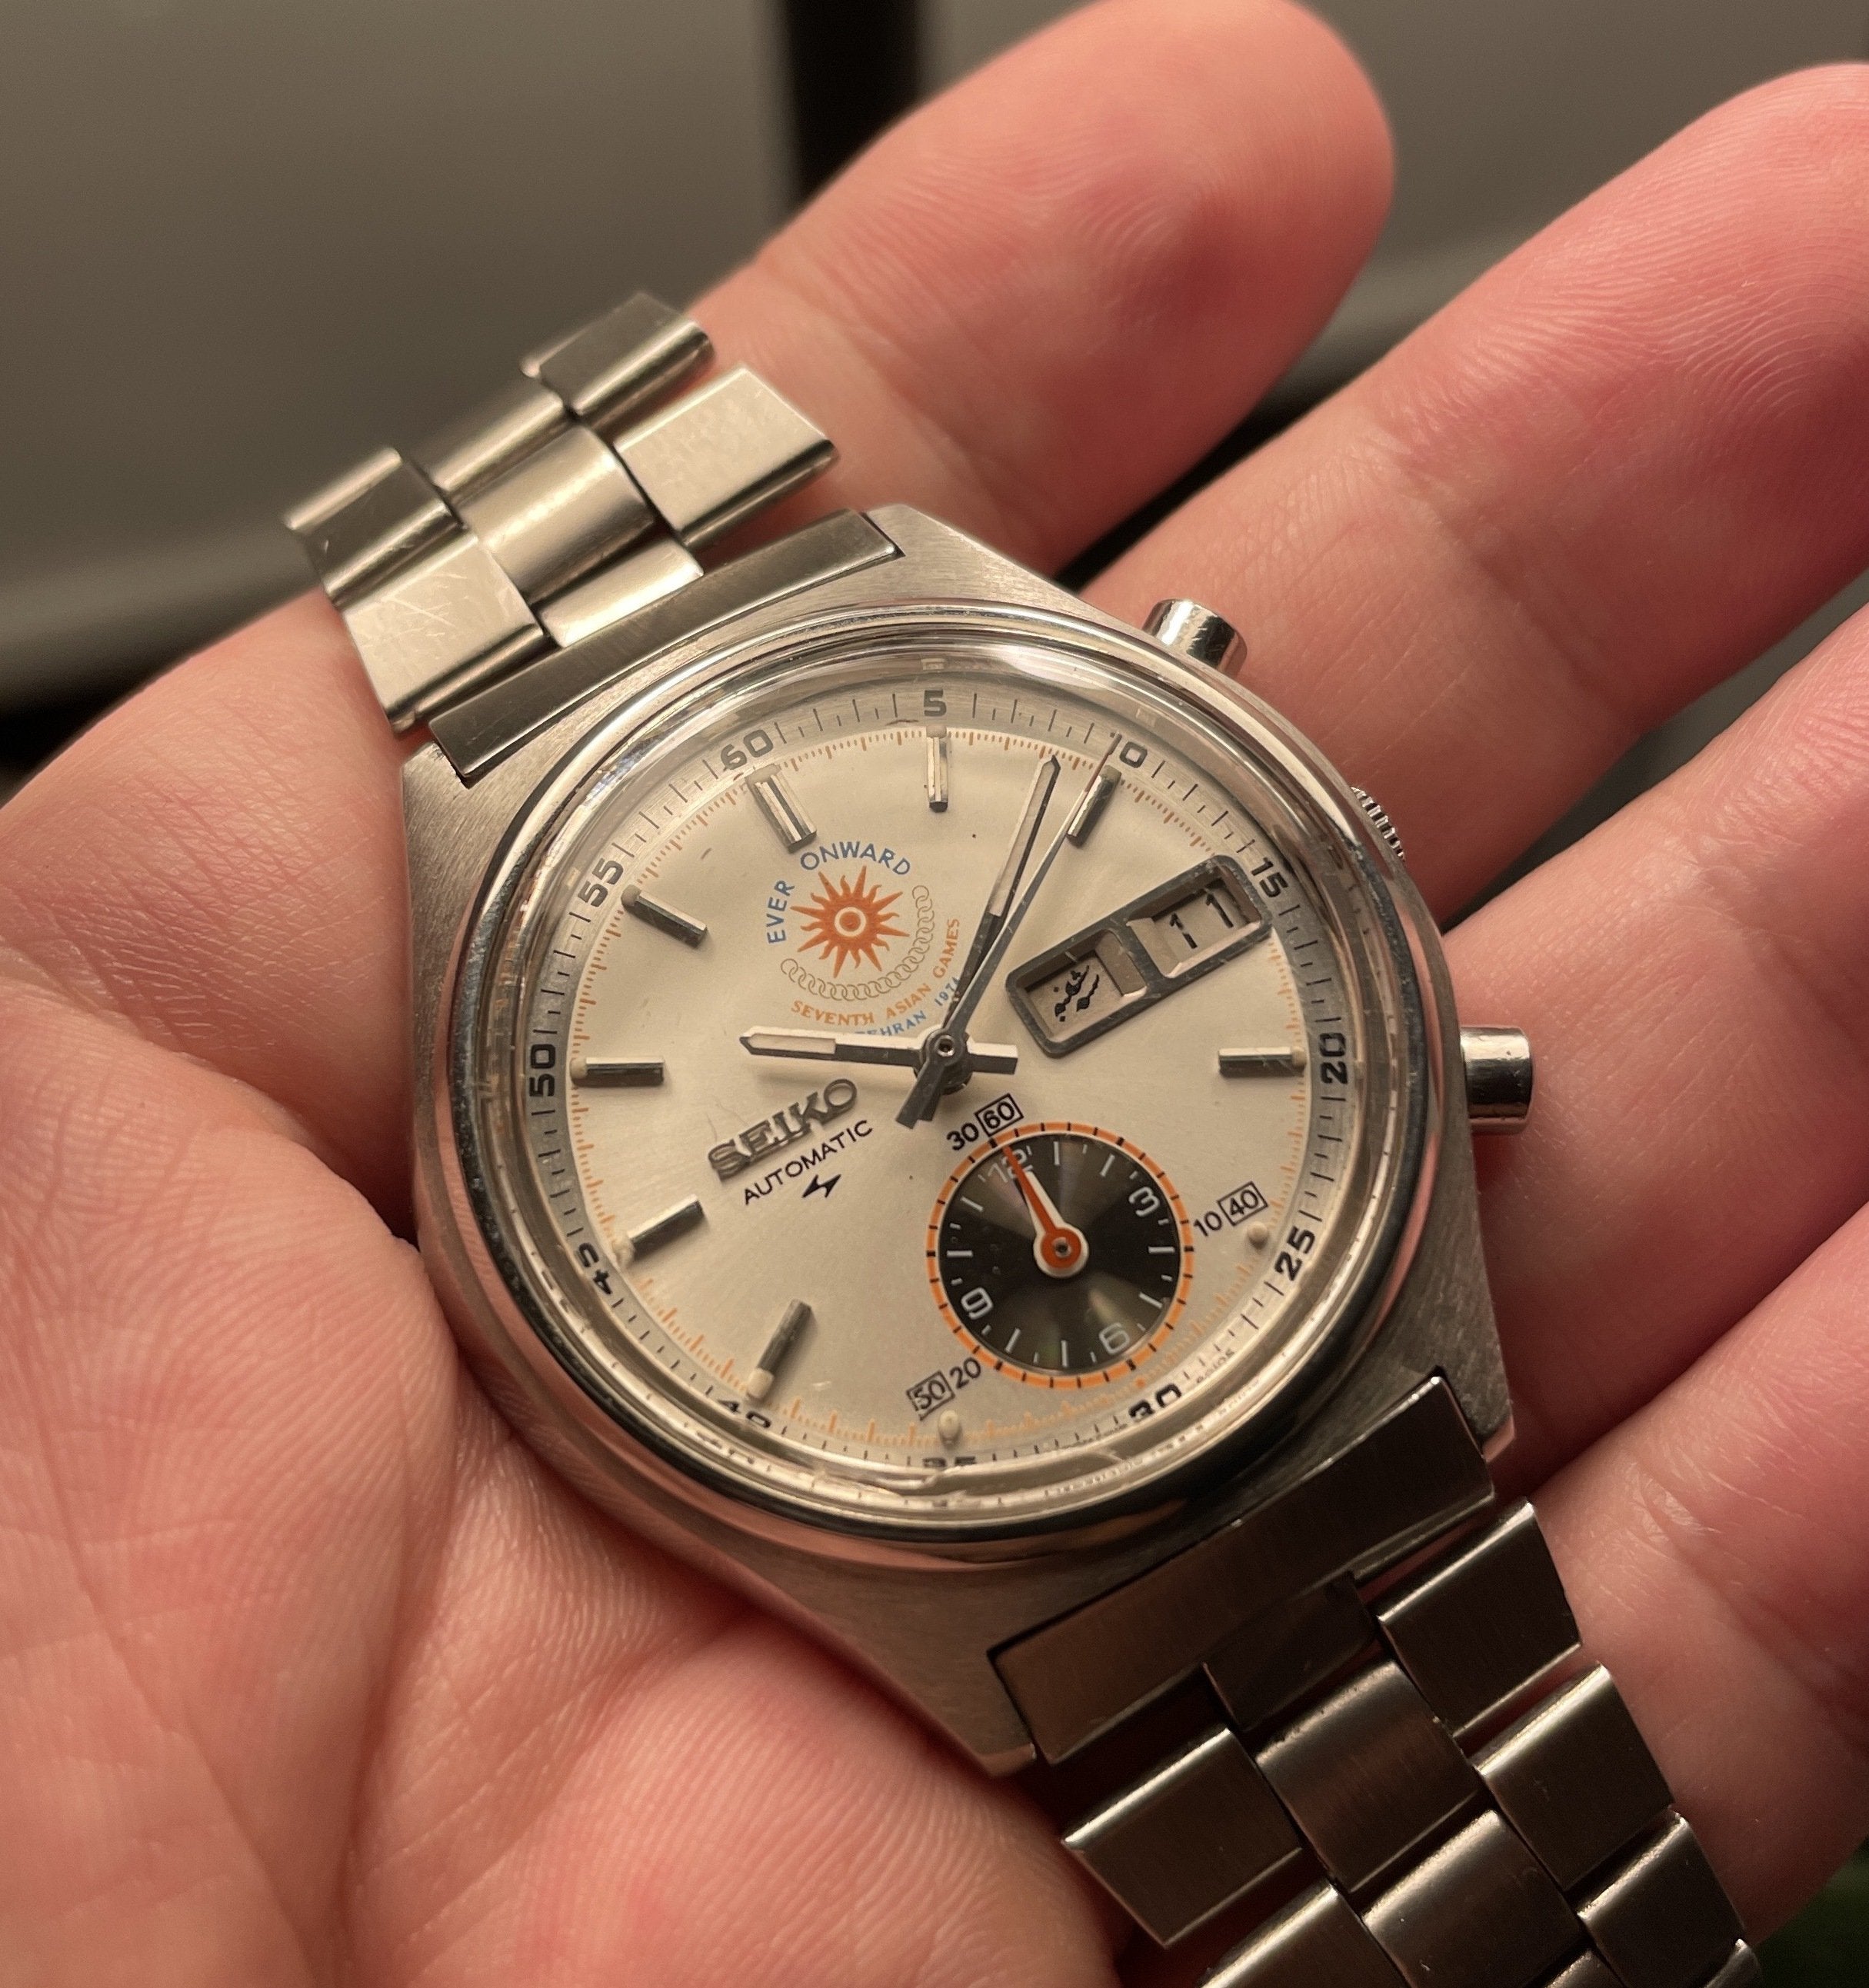 New Acquisition 7016-8001 Tehran Asian Games - Help verifying if its legit!  | The Watch Site